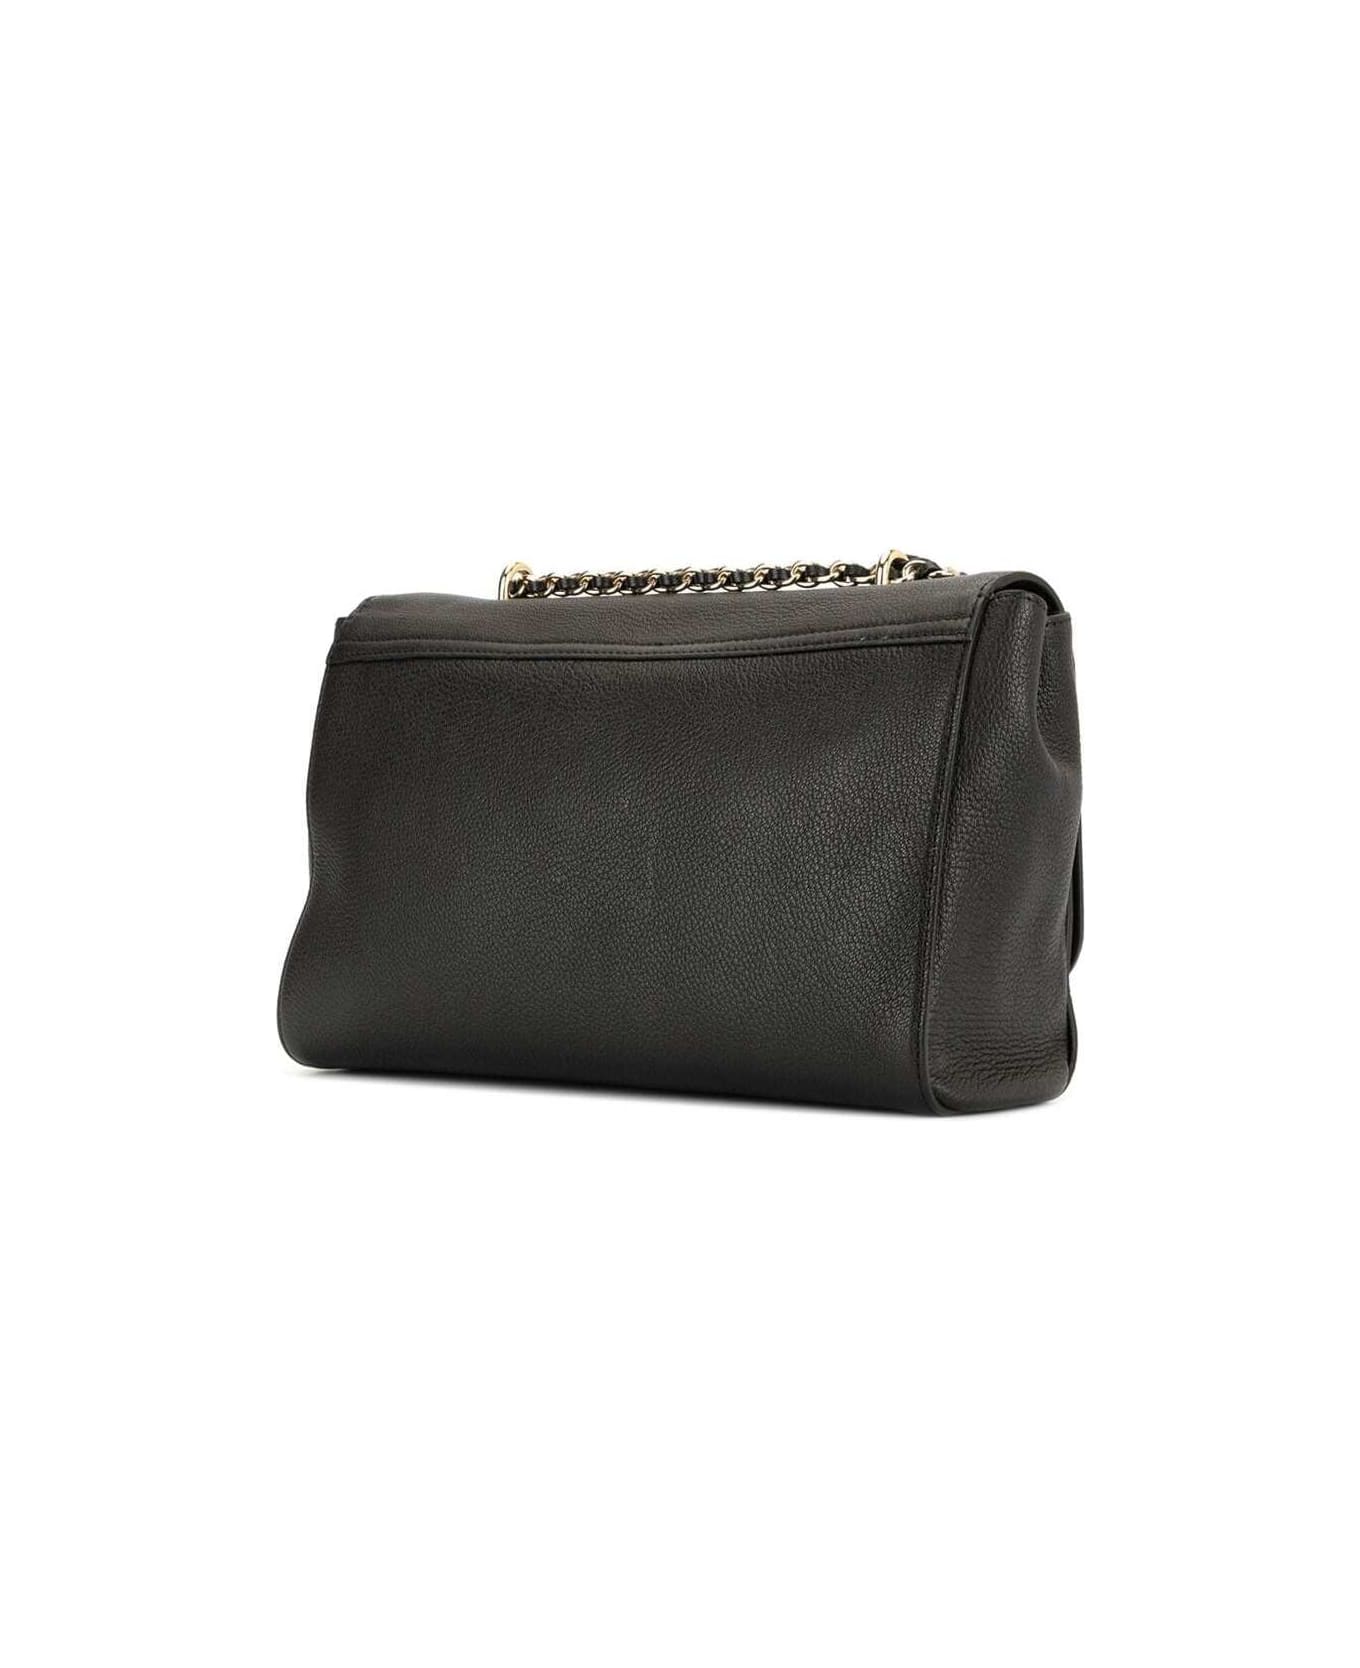 Mulberry 'lily Medium' Black Crossbody Bag With Sliding Chain In Leather Woman - Black